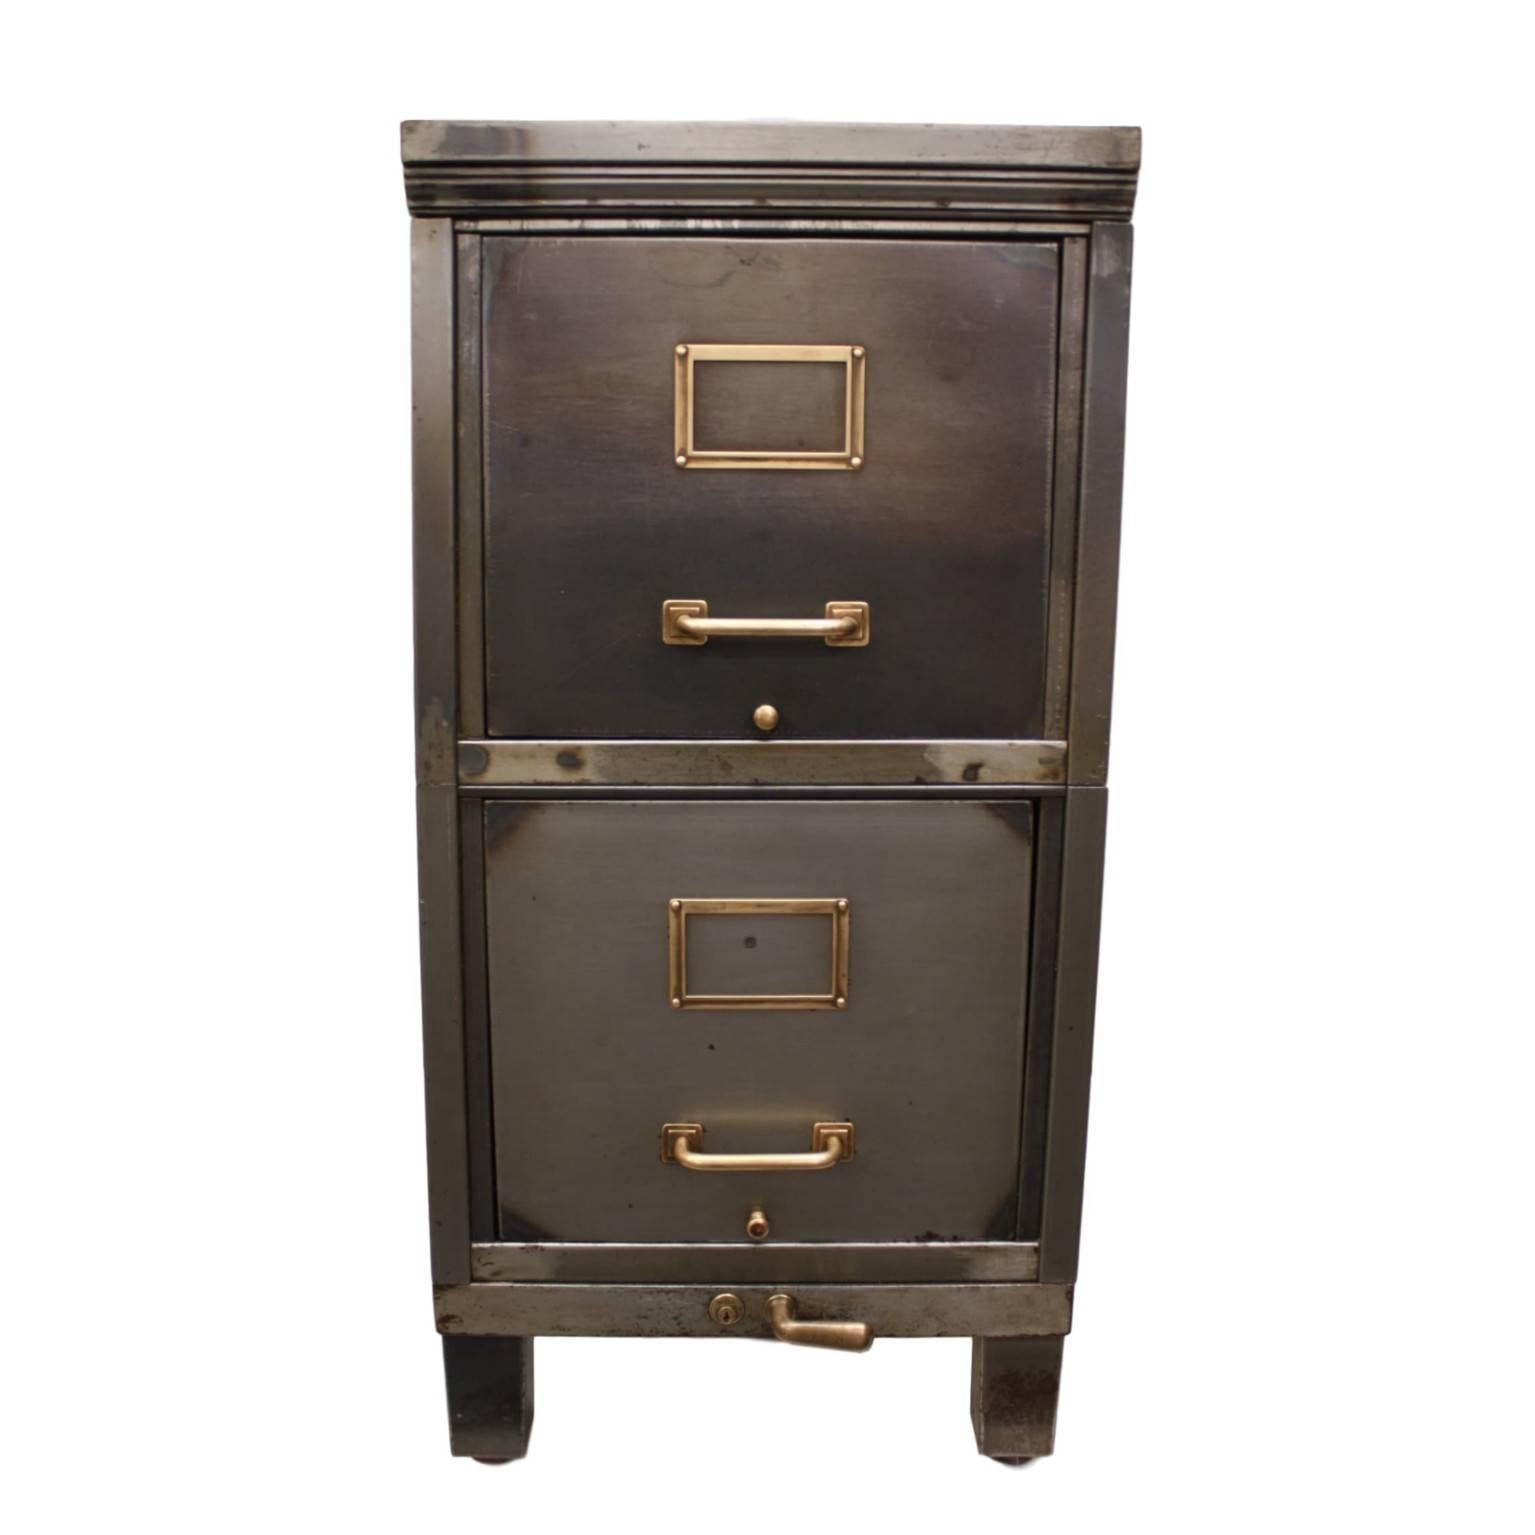 This wonderful little file cabinet has been customized in our workshop with a hand-stripped, hand-polished, raw steel patina sealed with a semi-gloss lacquer finish. The polished gray metal is beautifully complimented by the hand-polished original